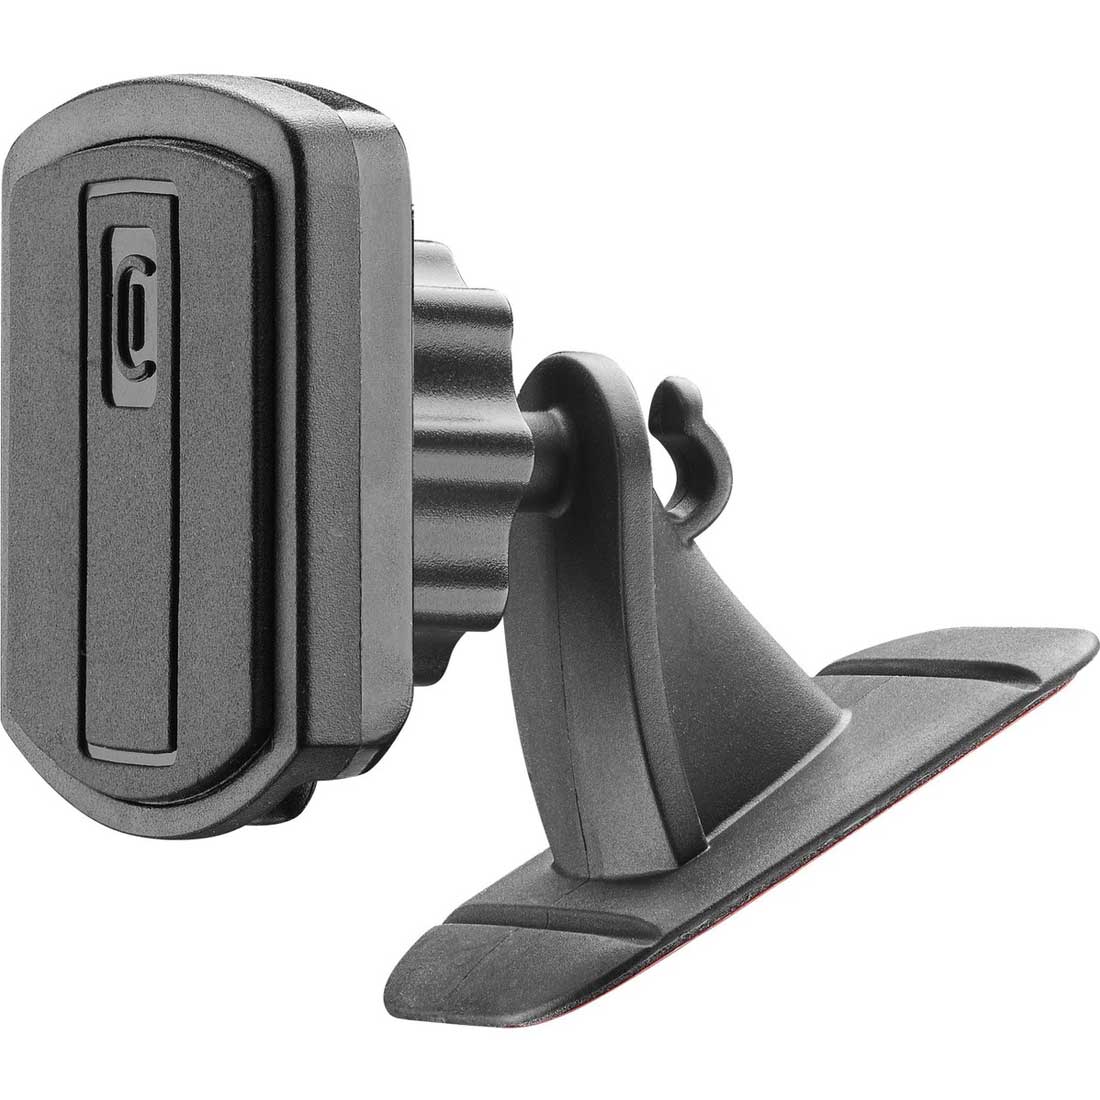 In-Car Holder Mag With Adhesive Mount - Touch Fix XL - Universal